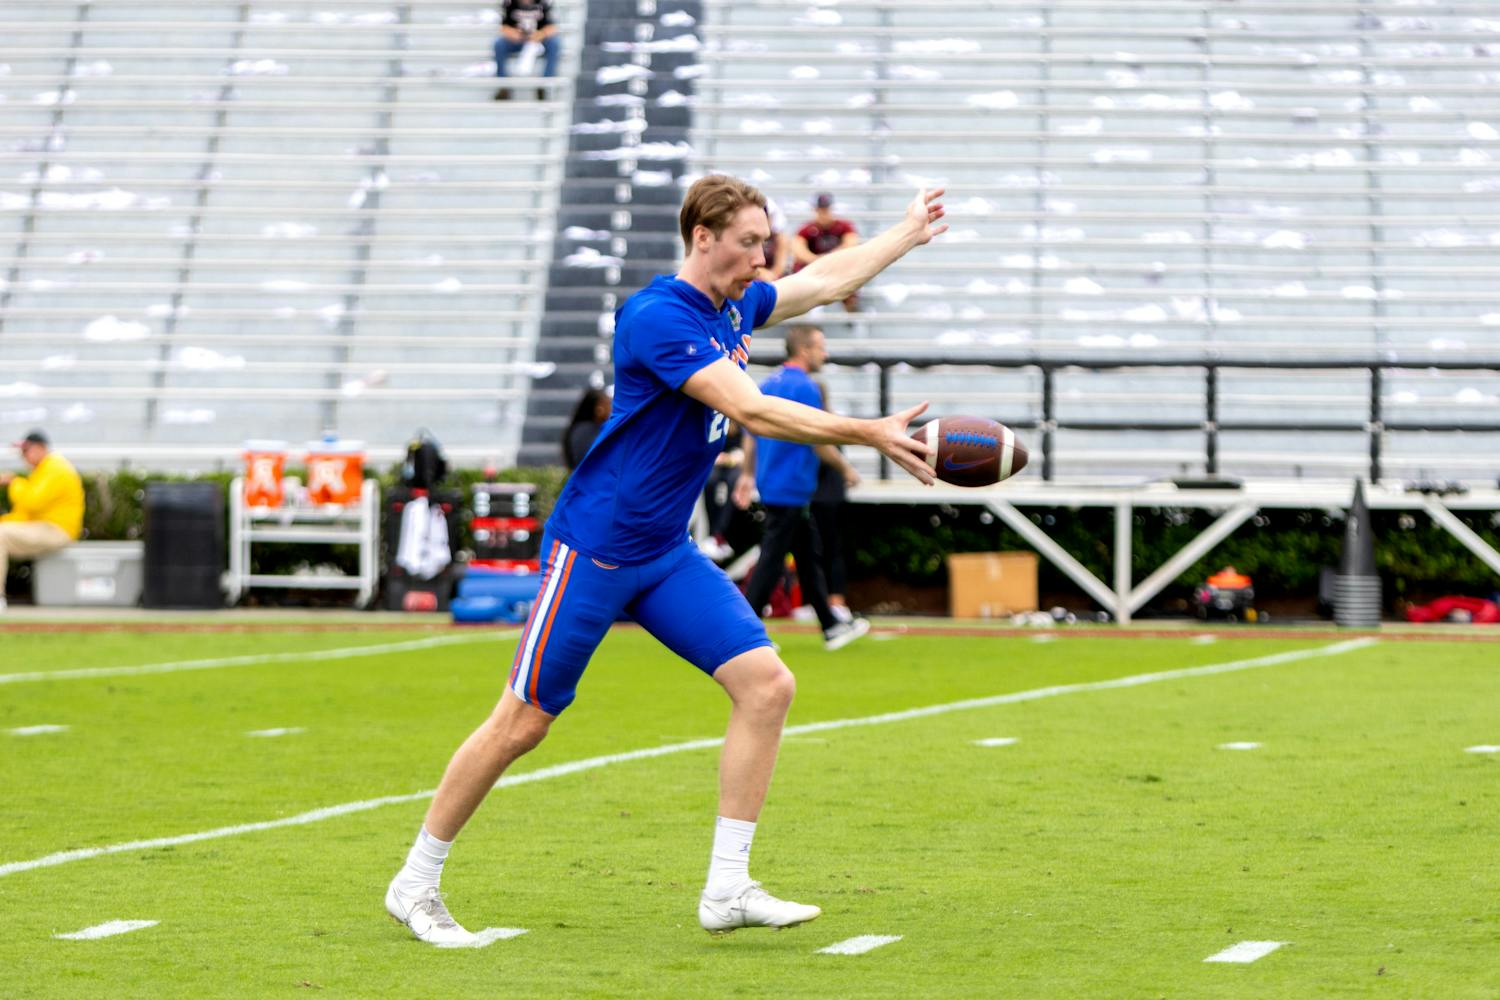 Junior punter Jeremy Crawshaw practices punting the ball before the Gators' game against the South Carolina Gamecocks on Saturday, Oct. 14, 2023.